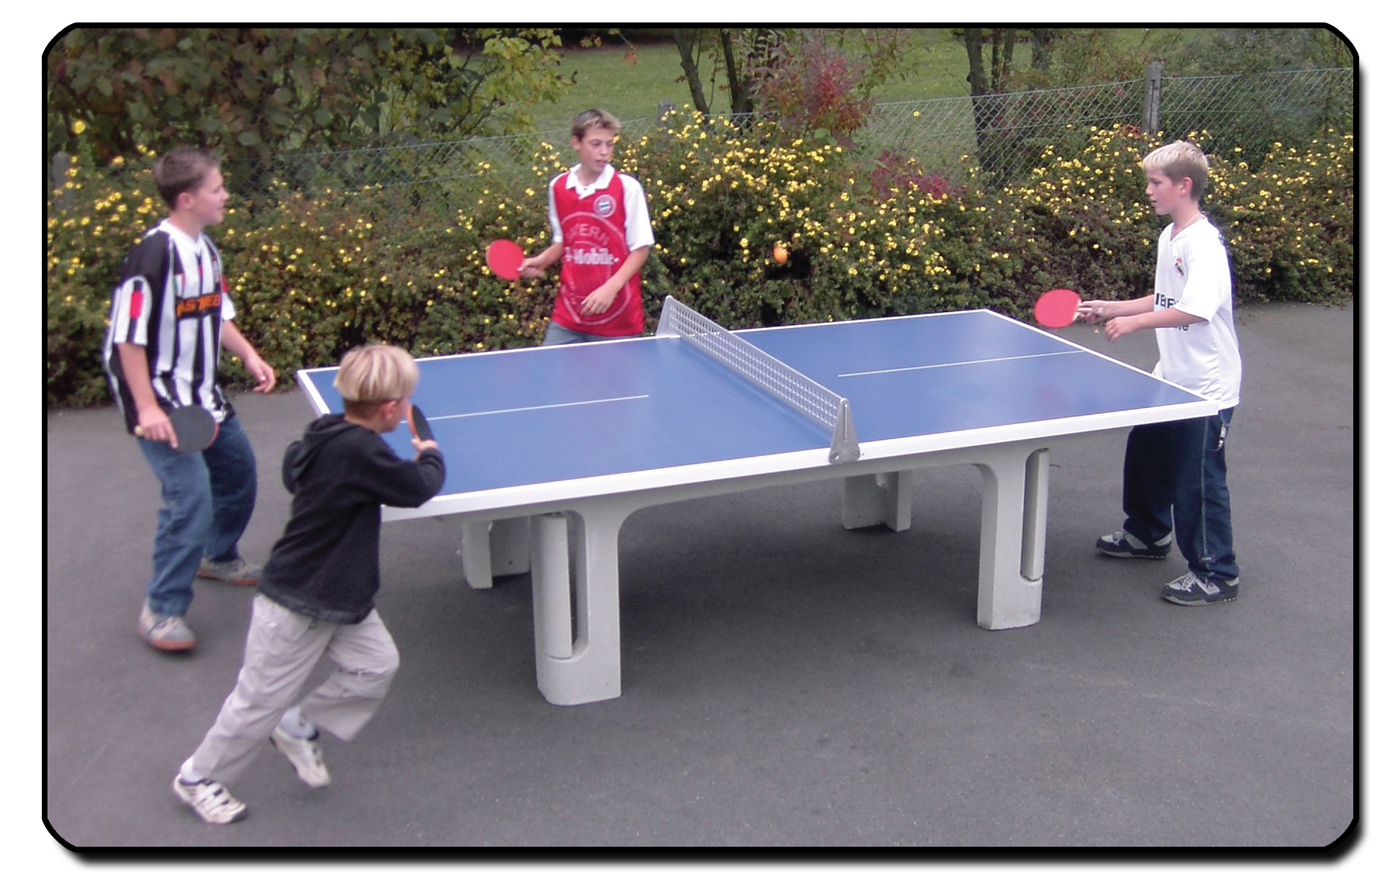 Butterfly Park Concrete table tennis table in use